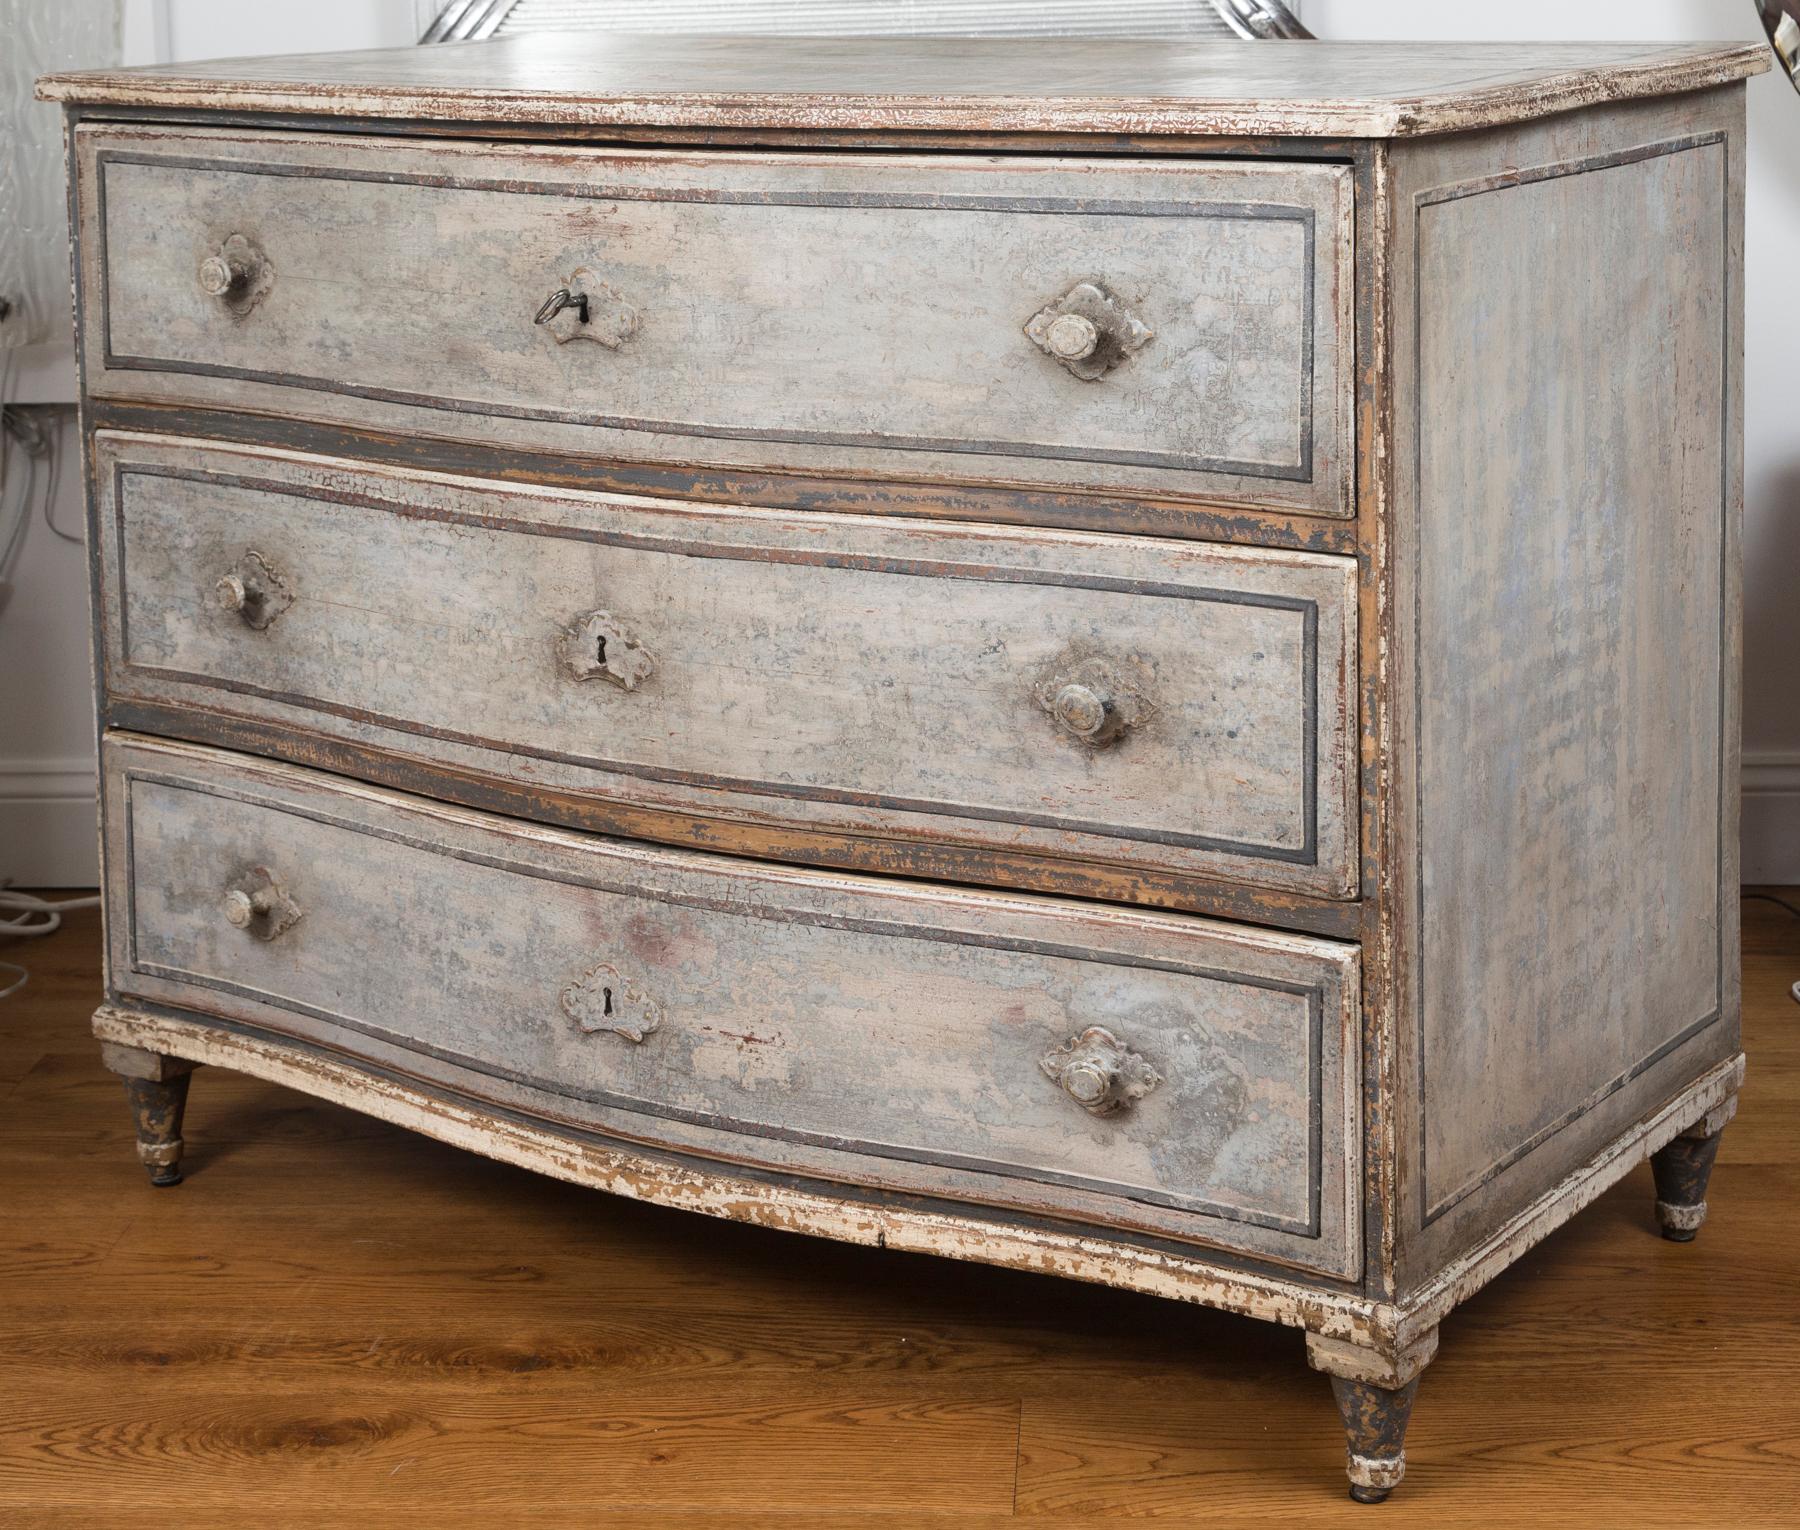 German Large 18th Century Baltic Painted Chest of Drawers